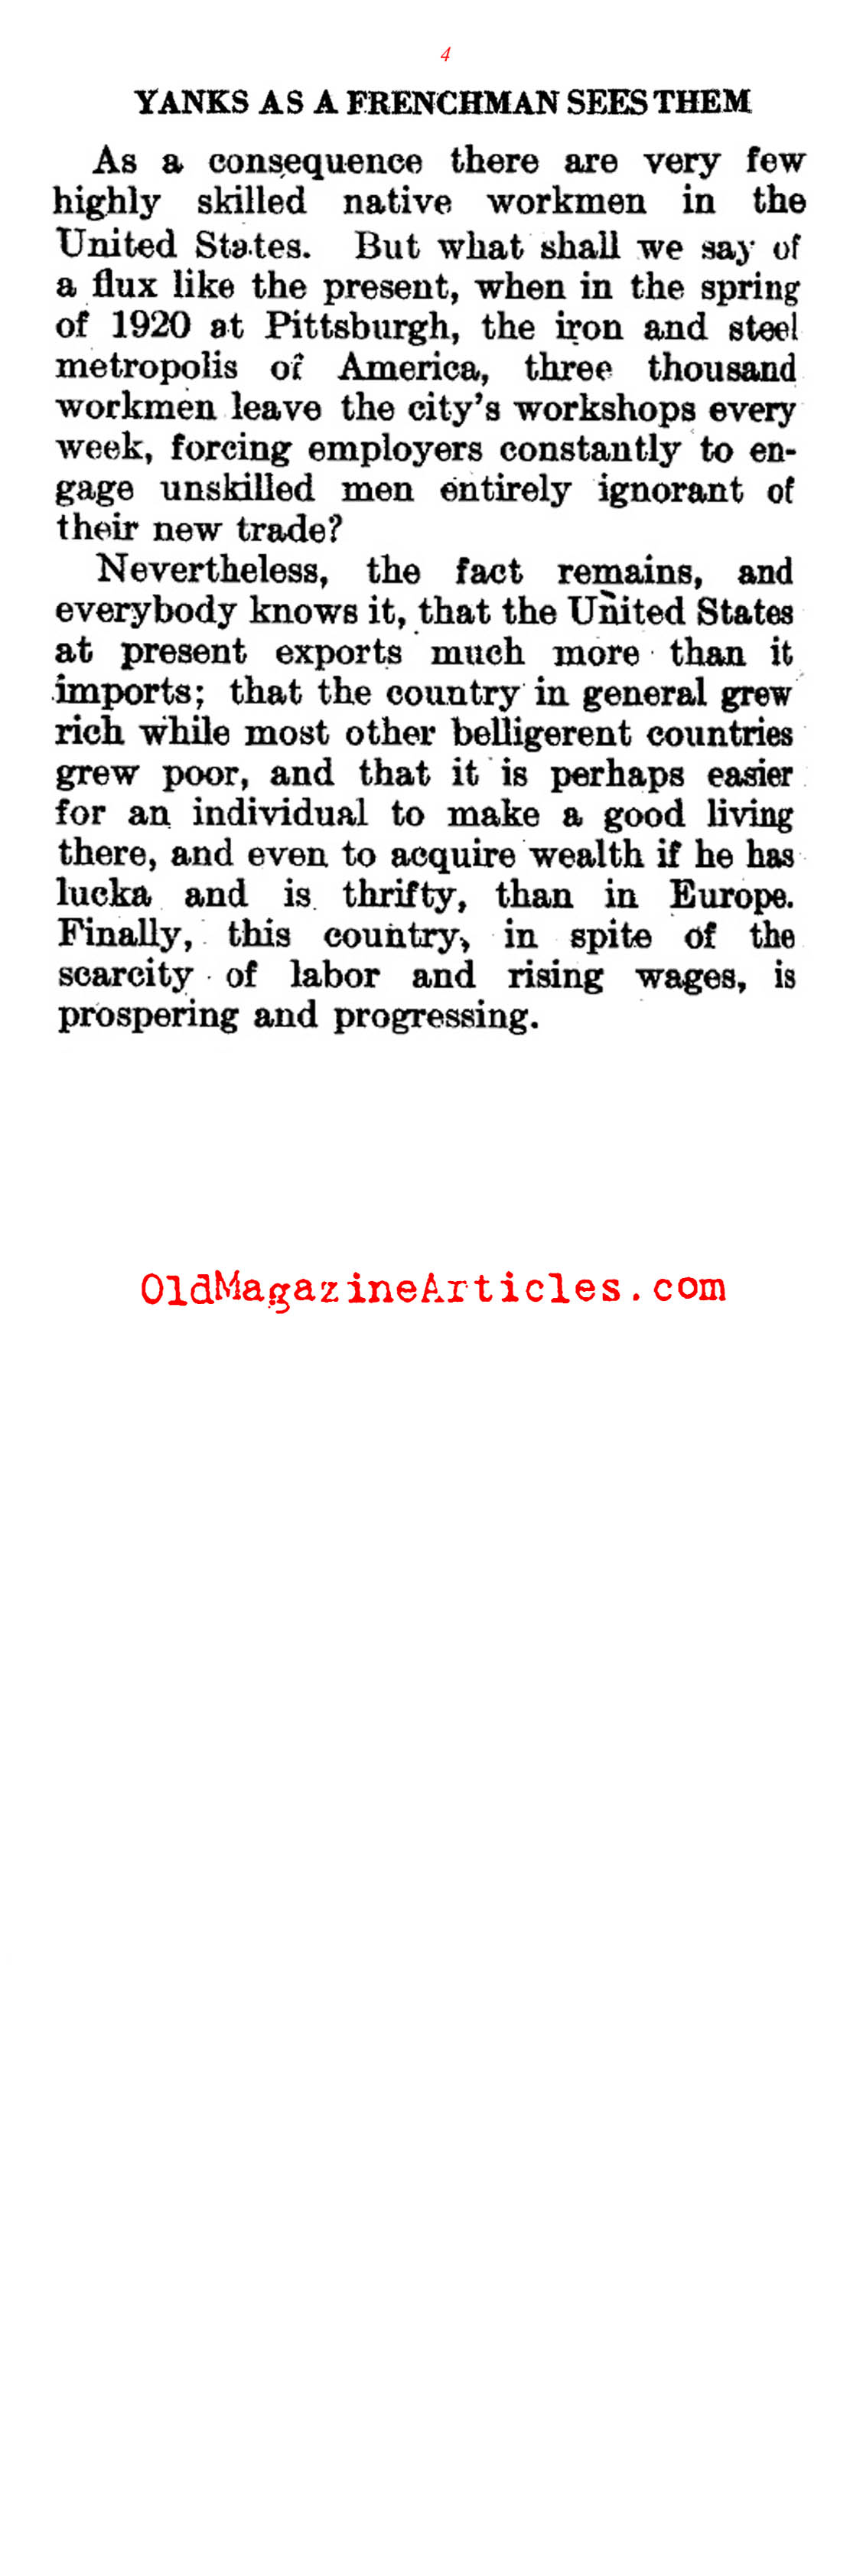 Salty Opinions from a Frenchman (Literary Digest, 1920)